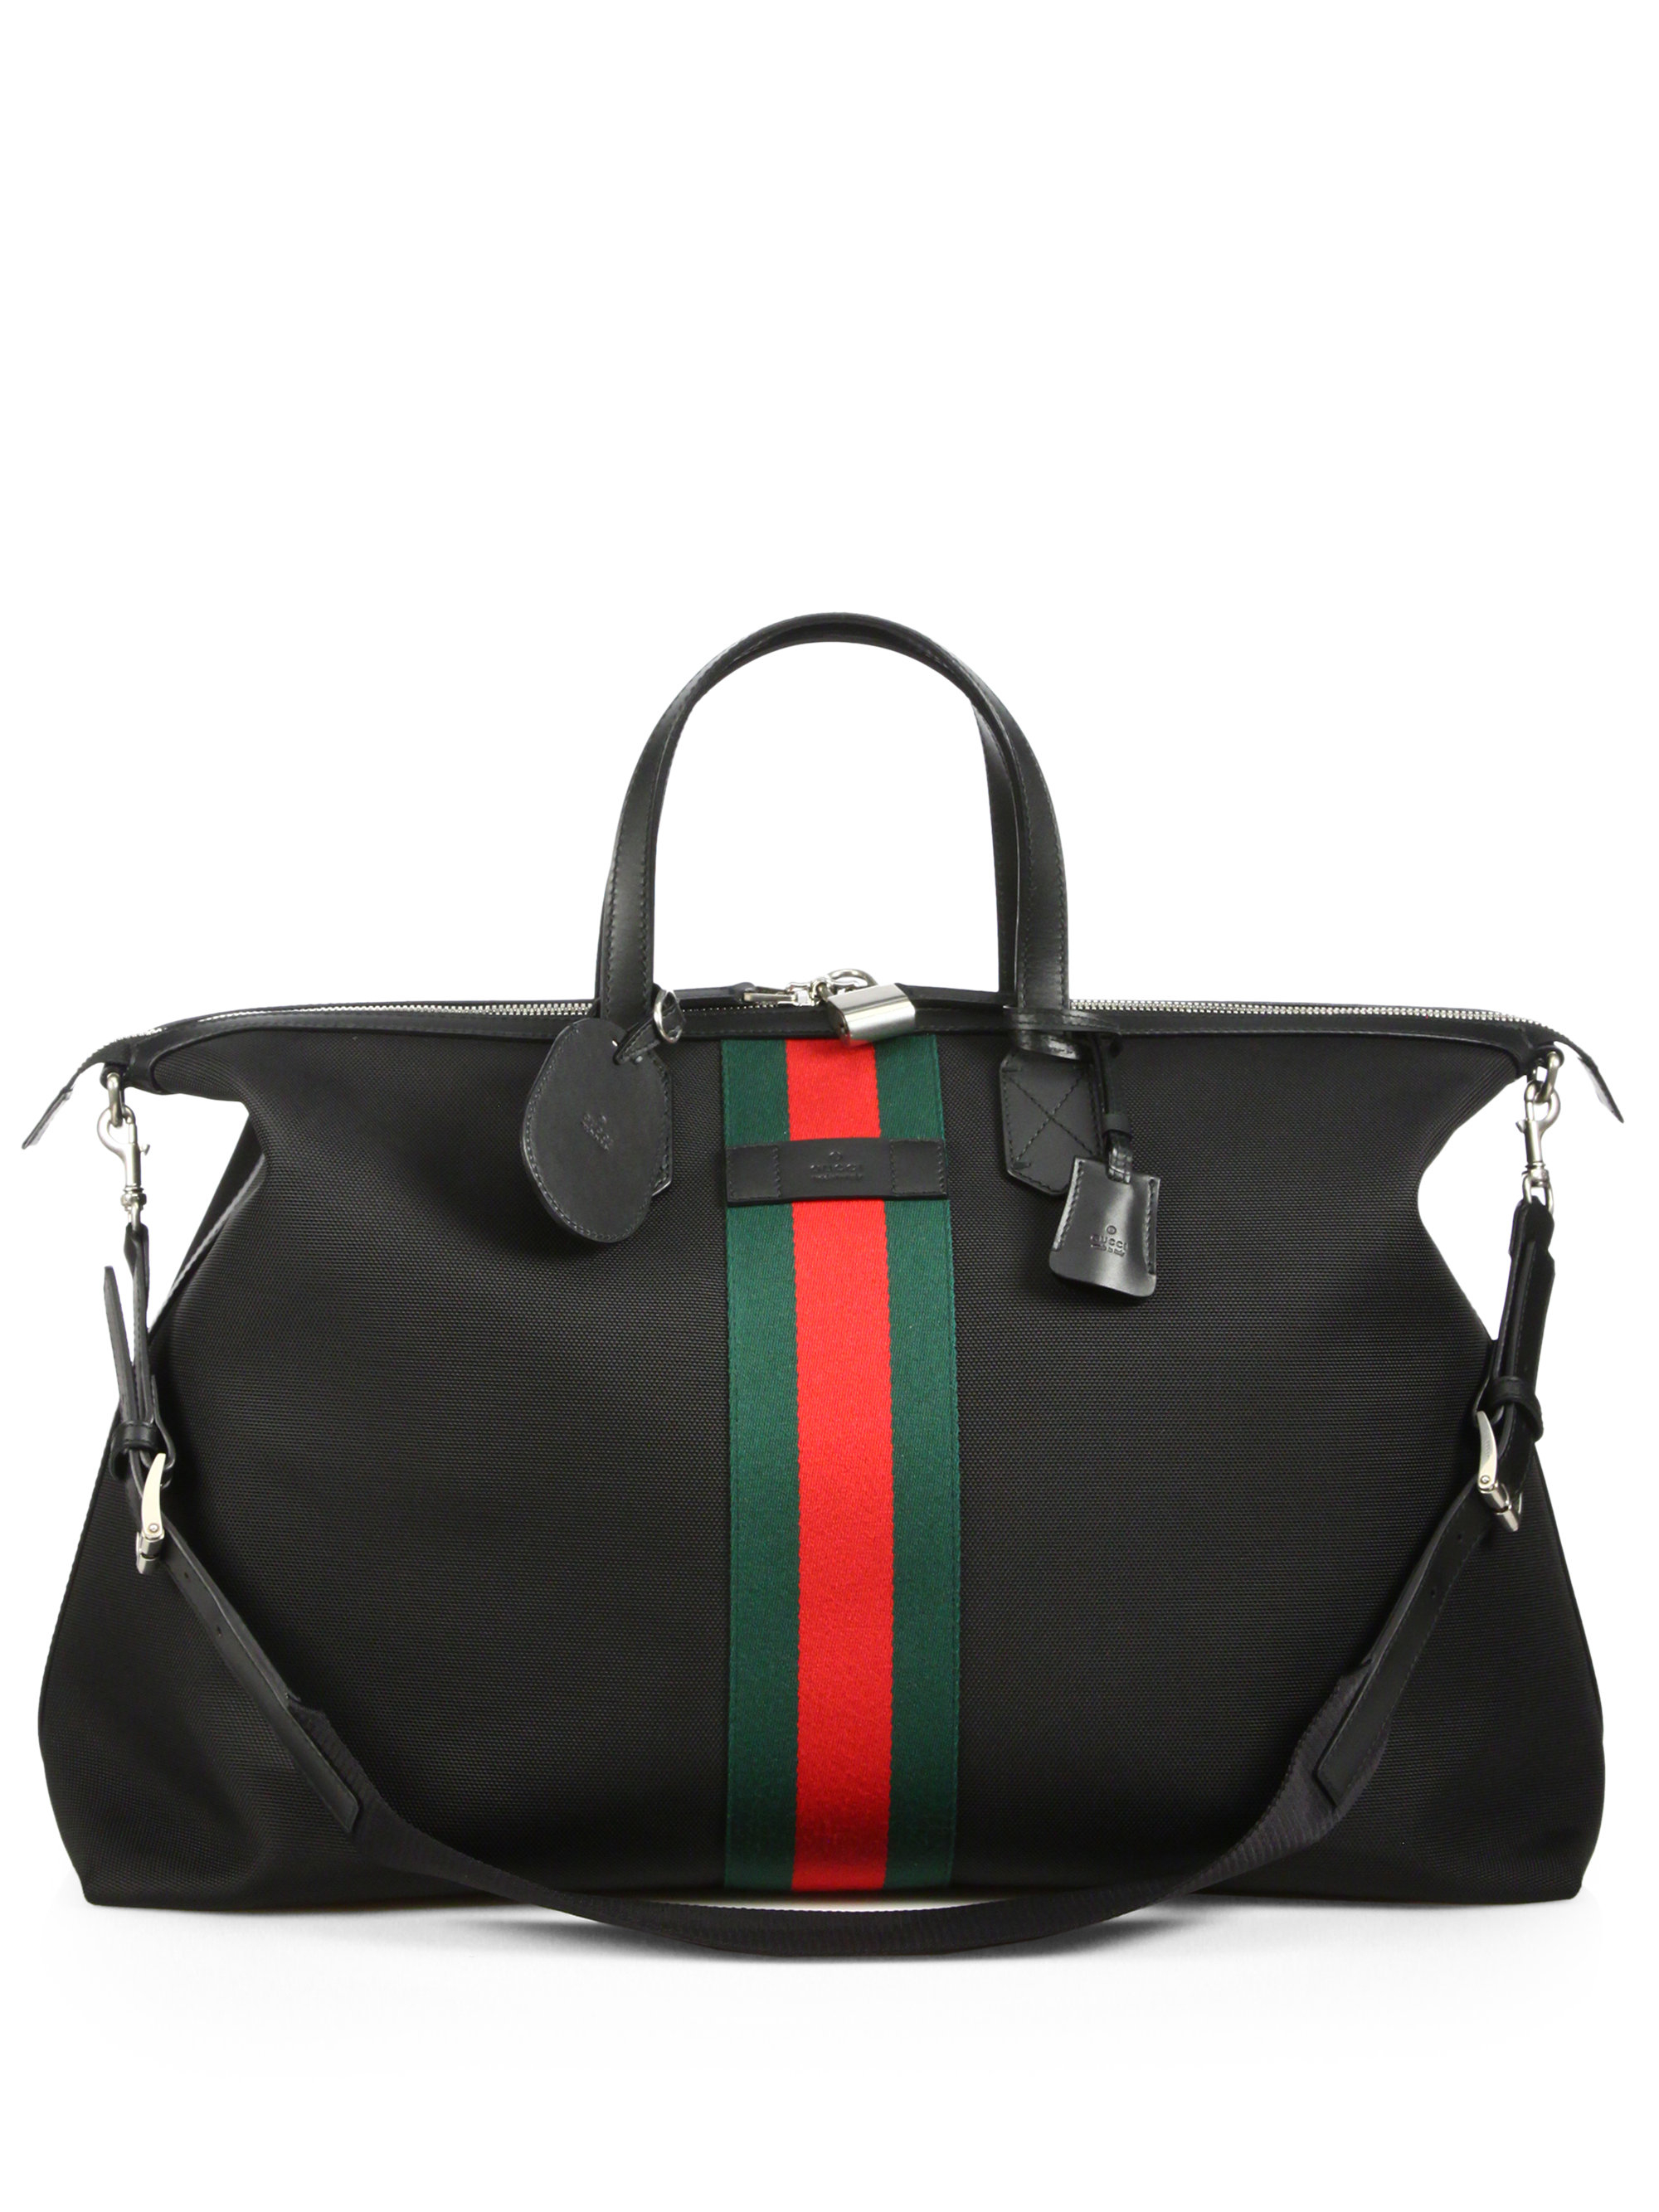 Lyst - Gucci Techno Canvas Duffel Carry-on Bag in Black for Men